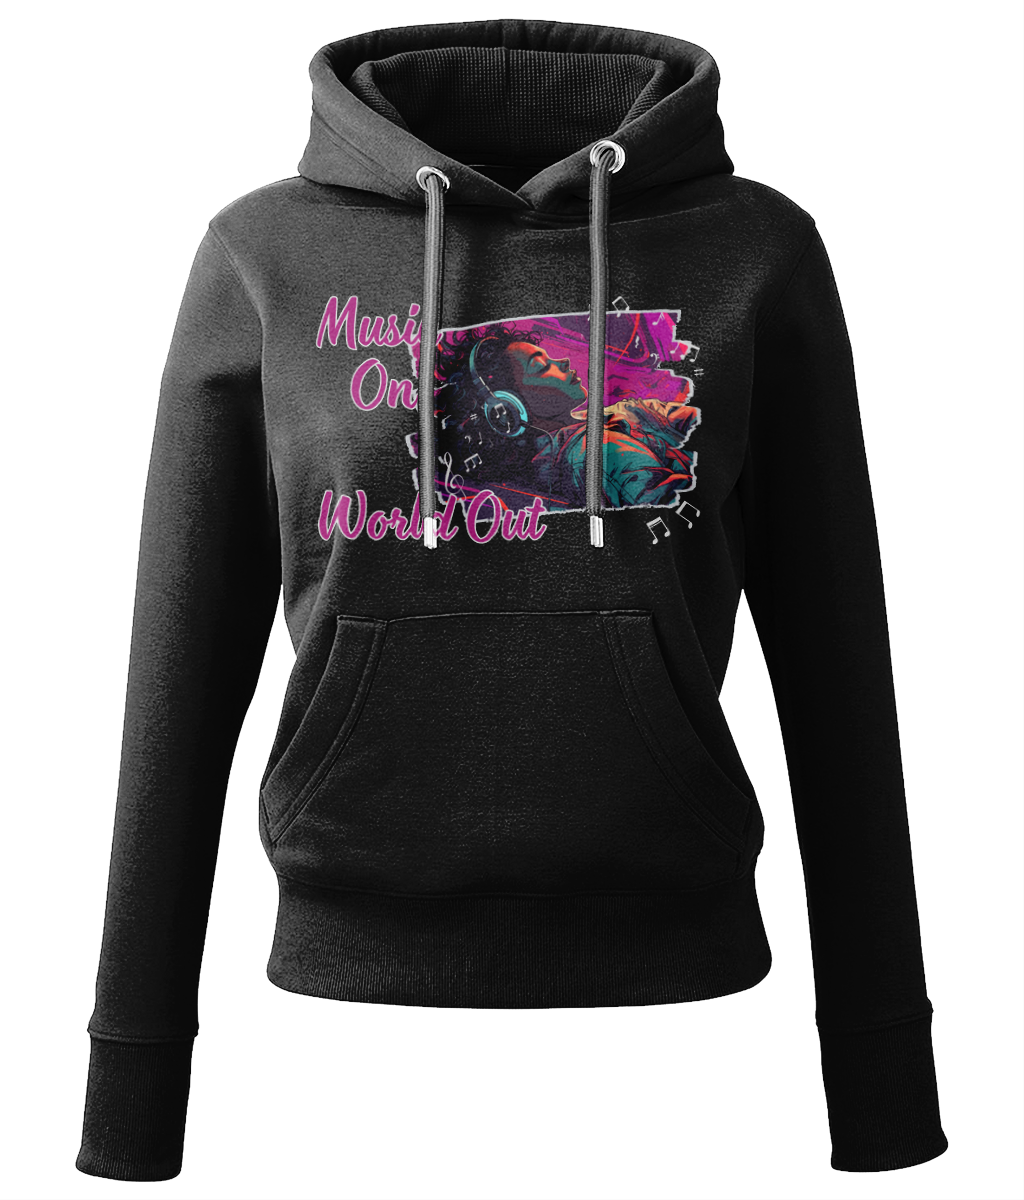 Eco-Friendly Women's Hoodie - Music On, World Out